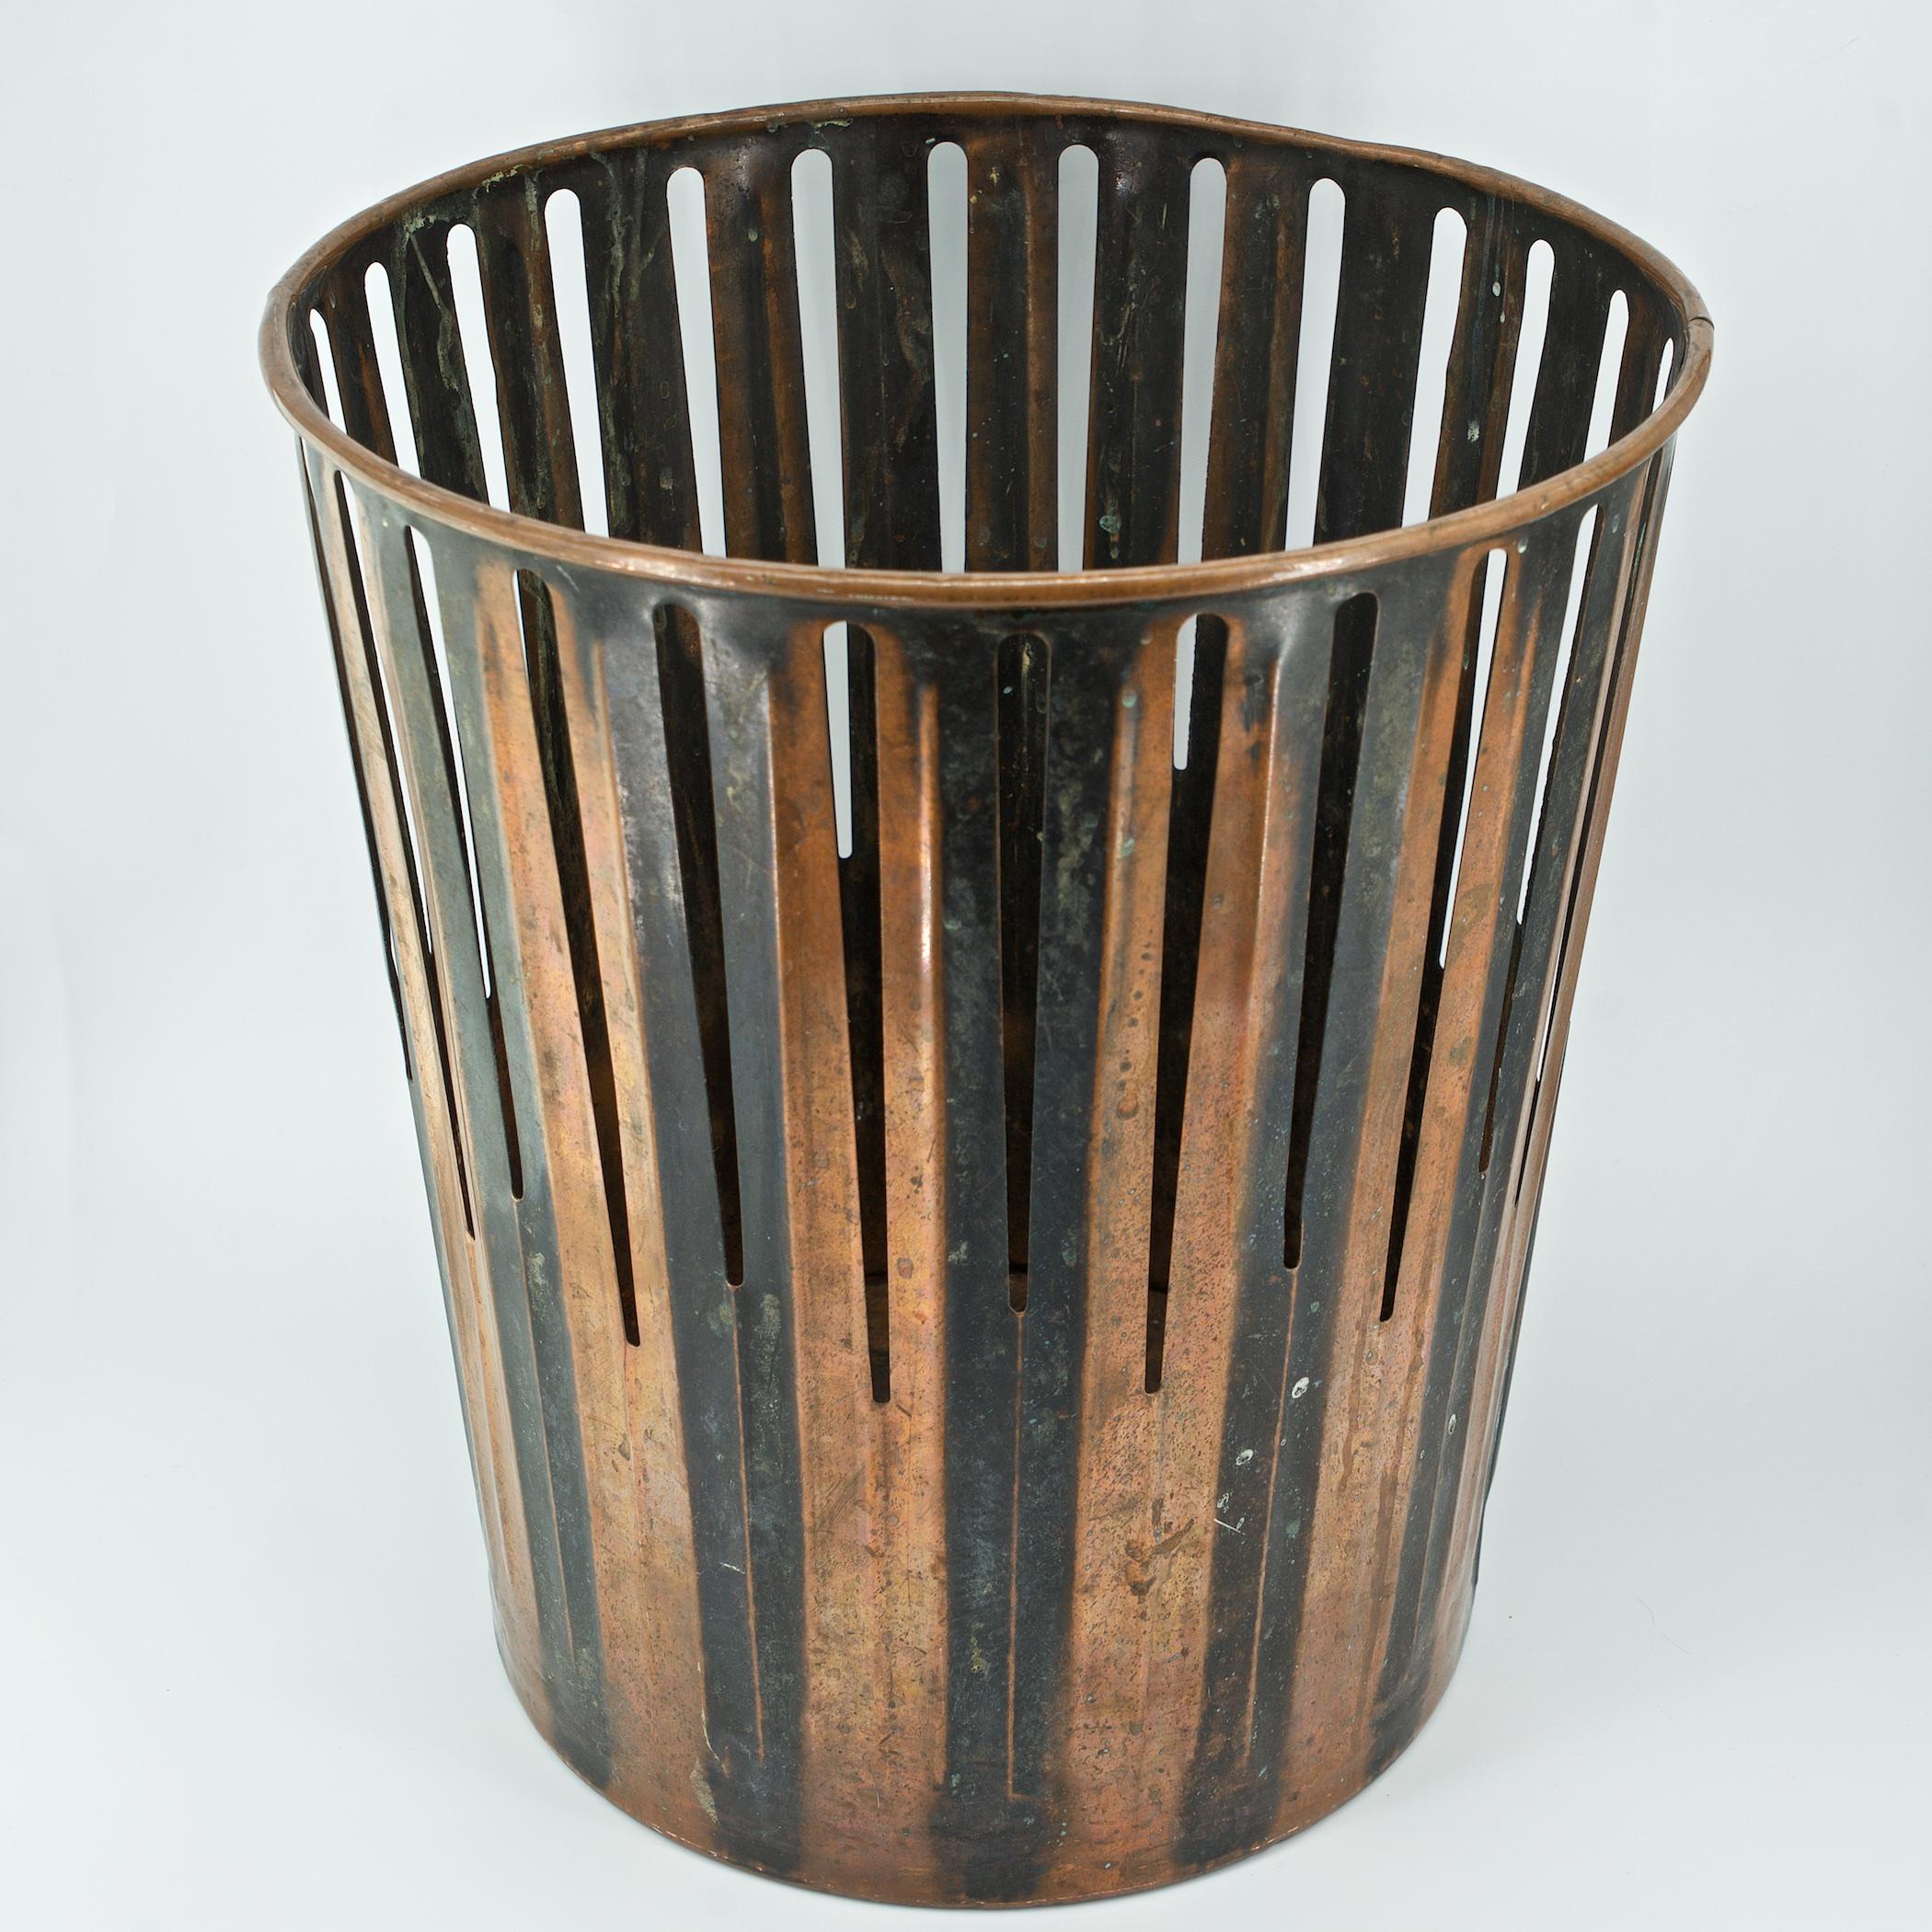 Quite extraordinary condition considering design use and age. Base metal is tin or thin steel with a still very bright flashed copper surface, with copper vertical stripes, and copper lip. One of the larger size being over 14 inches high, with no